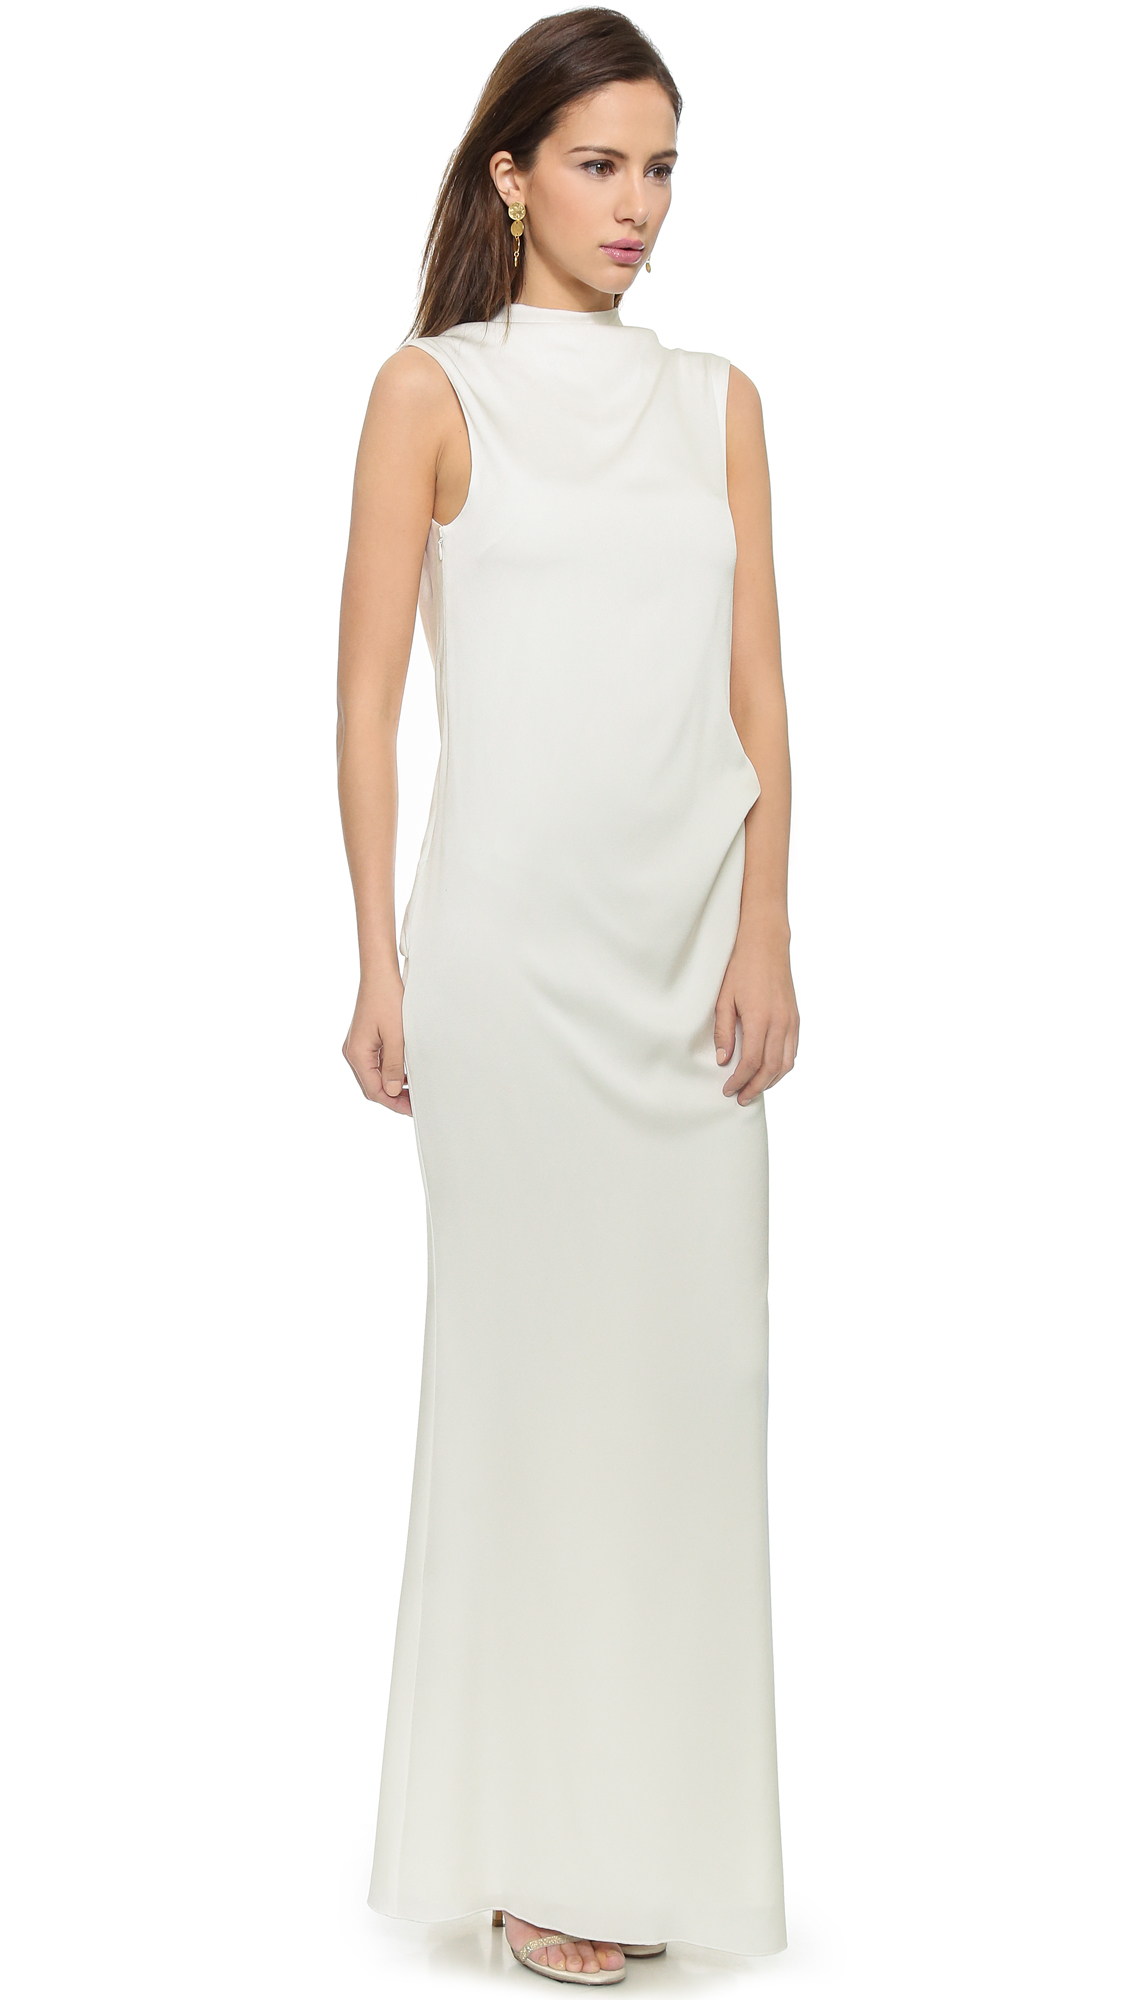 Lyst - Camilla & Marc Silver Lining Dress - Winter White in White